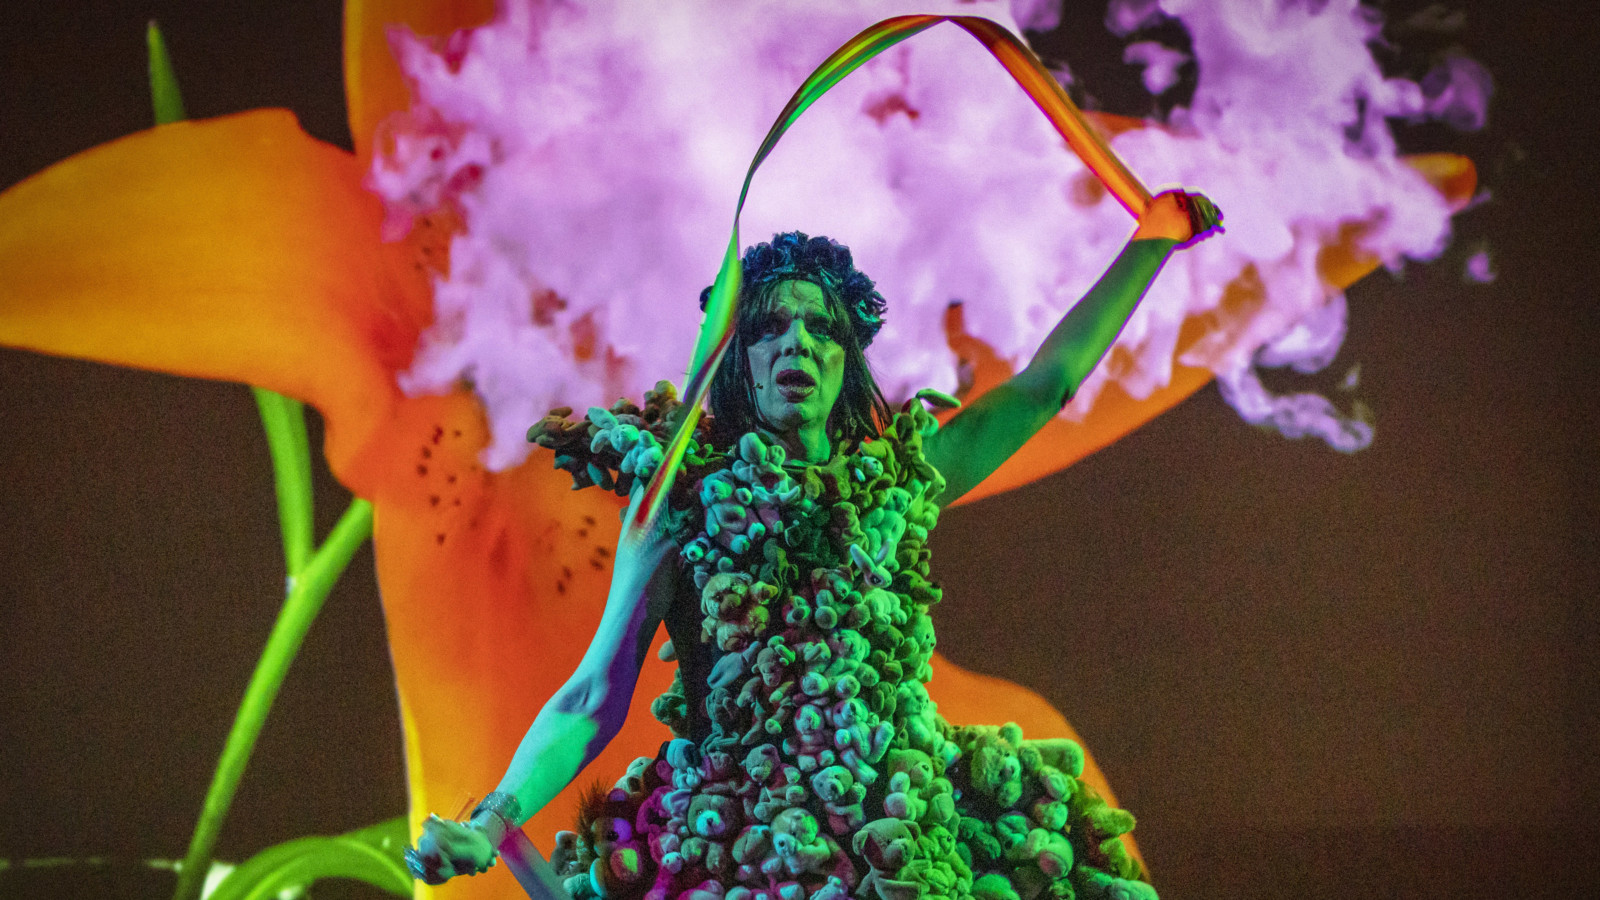 David Hoyle wearing a dress made of teddy bears, with pink smoke in the background.